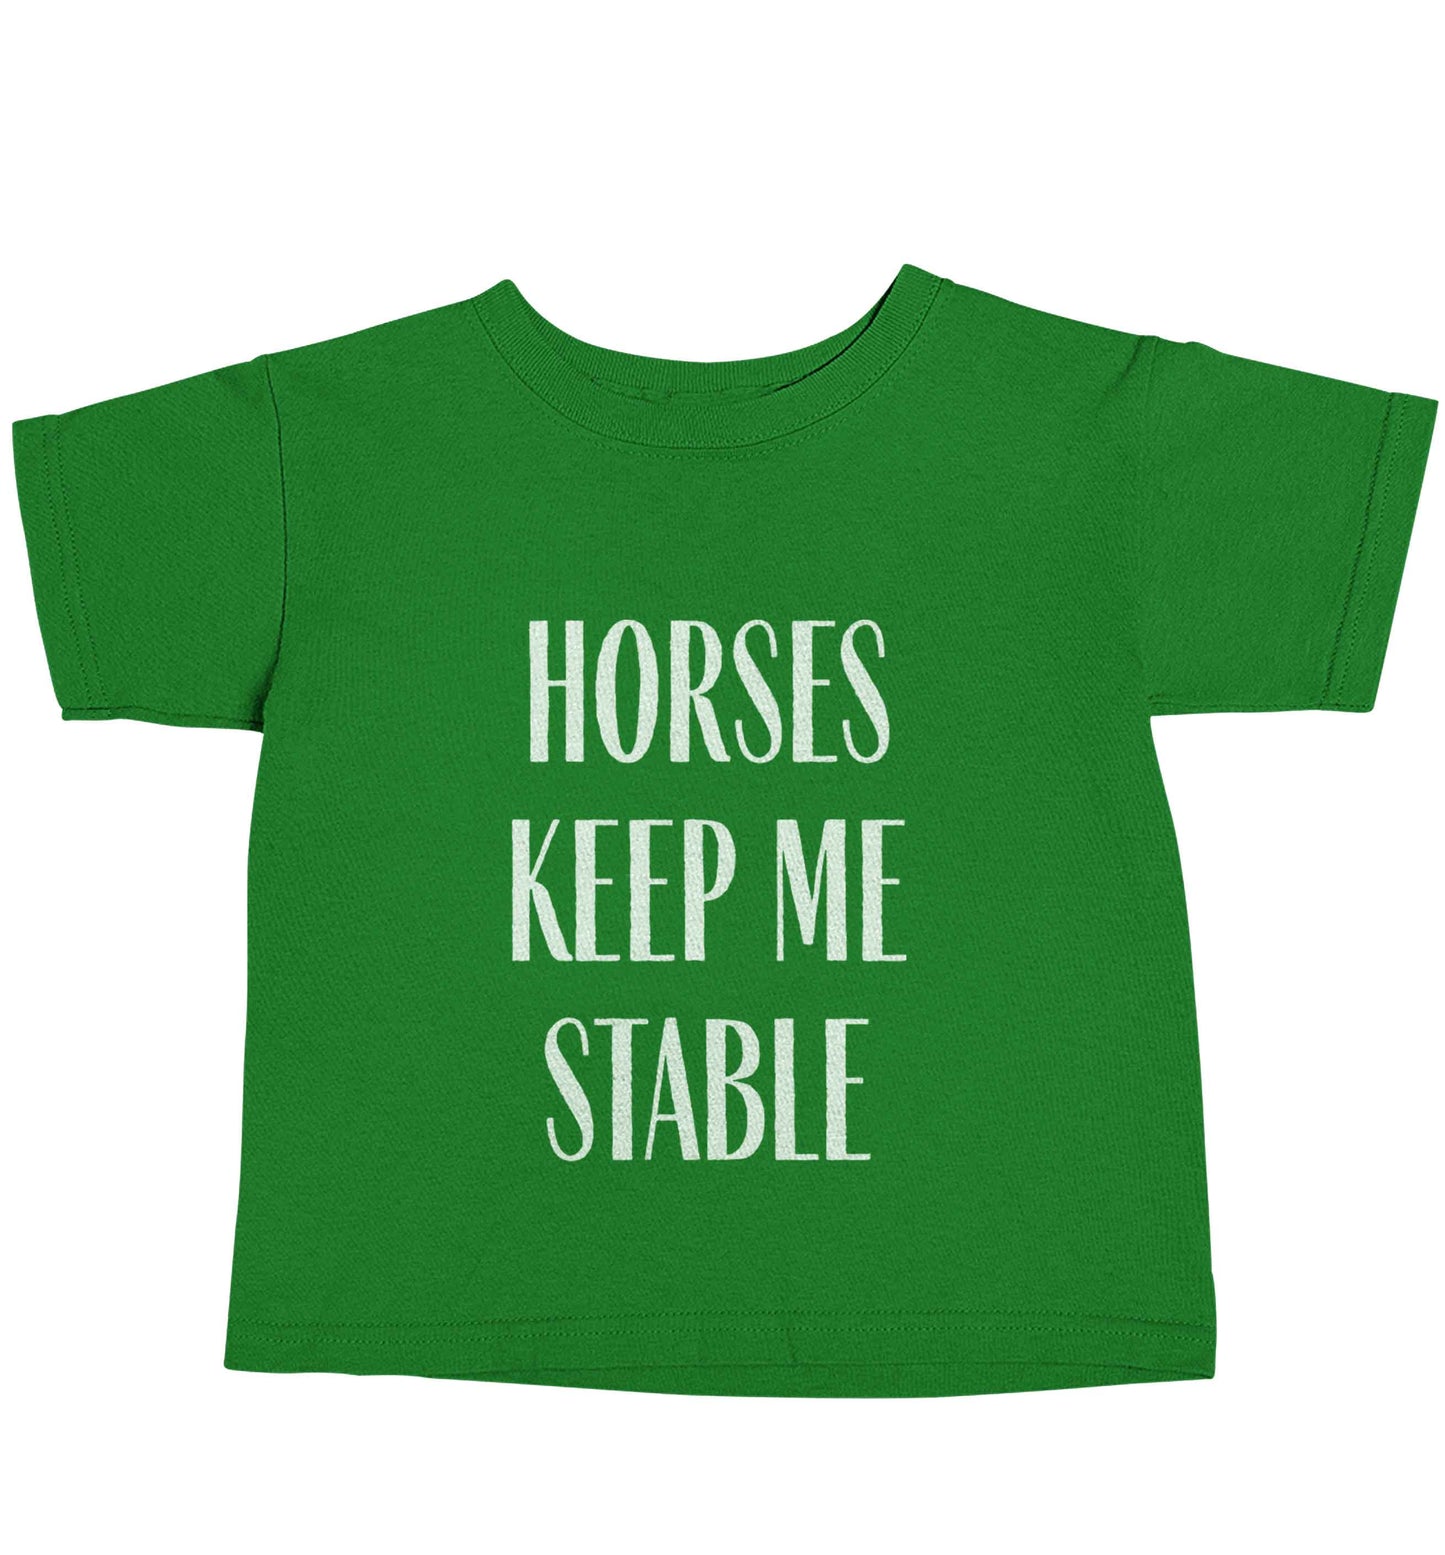 Horses keep me stable green baby toddler Tshirt 2 Years